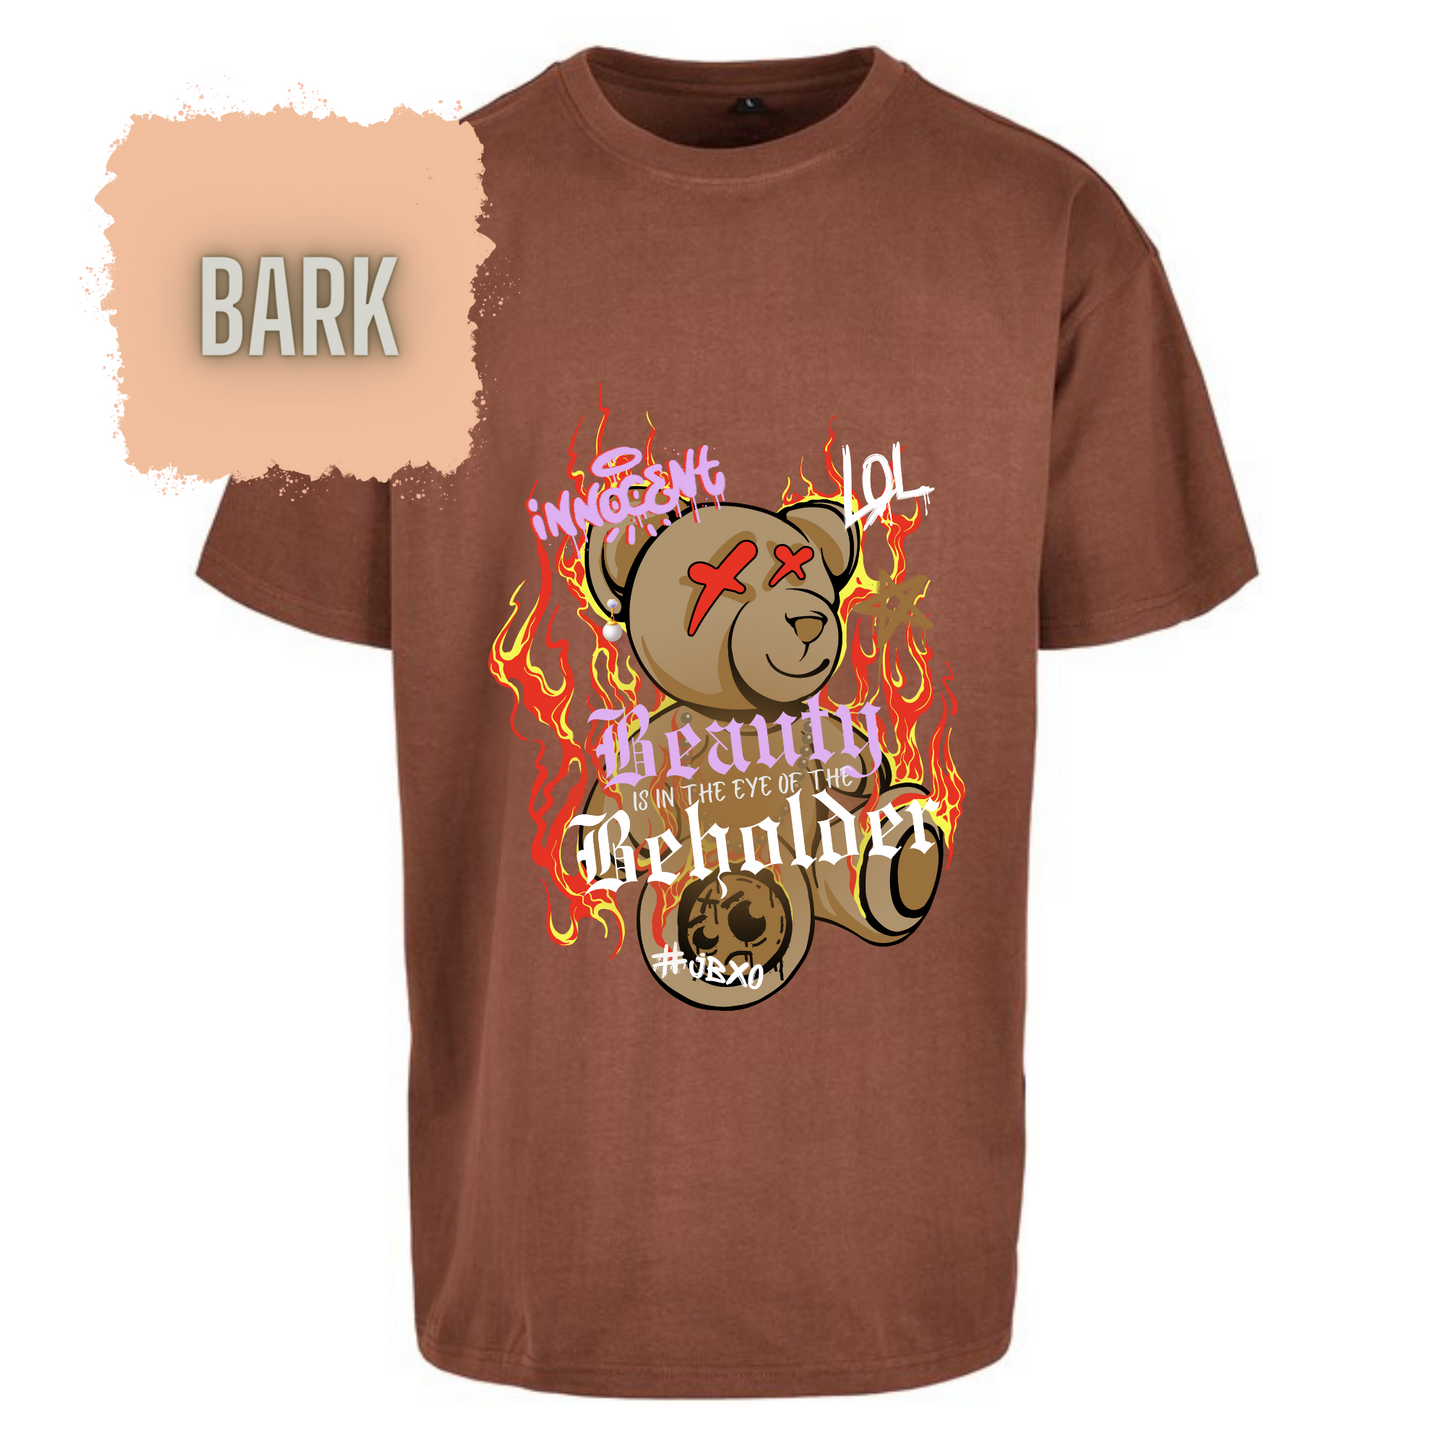 Beauty is in the Eye of the Beholder Oversized T-shirt